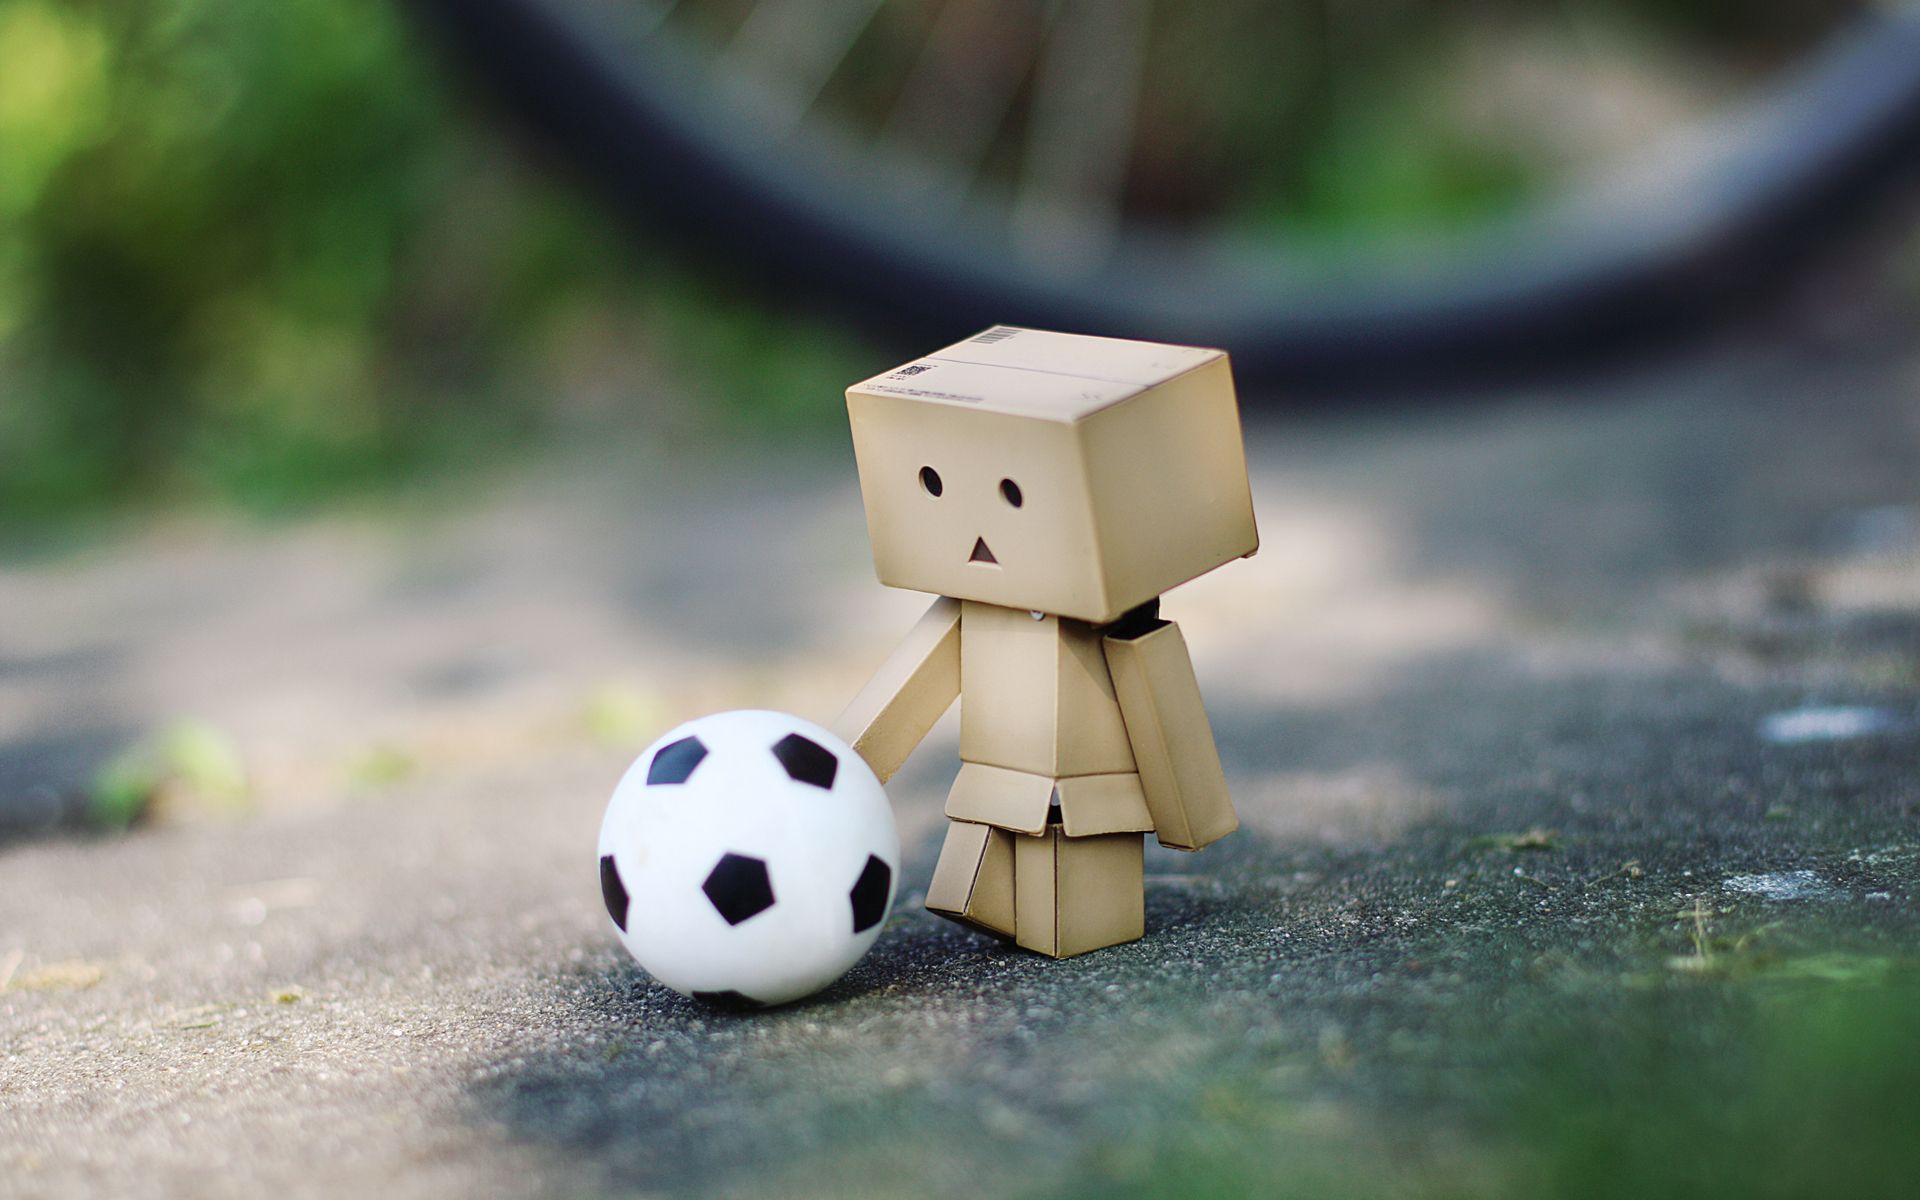 A little toy is standing next too the ball - Soccer